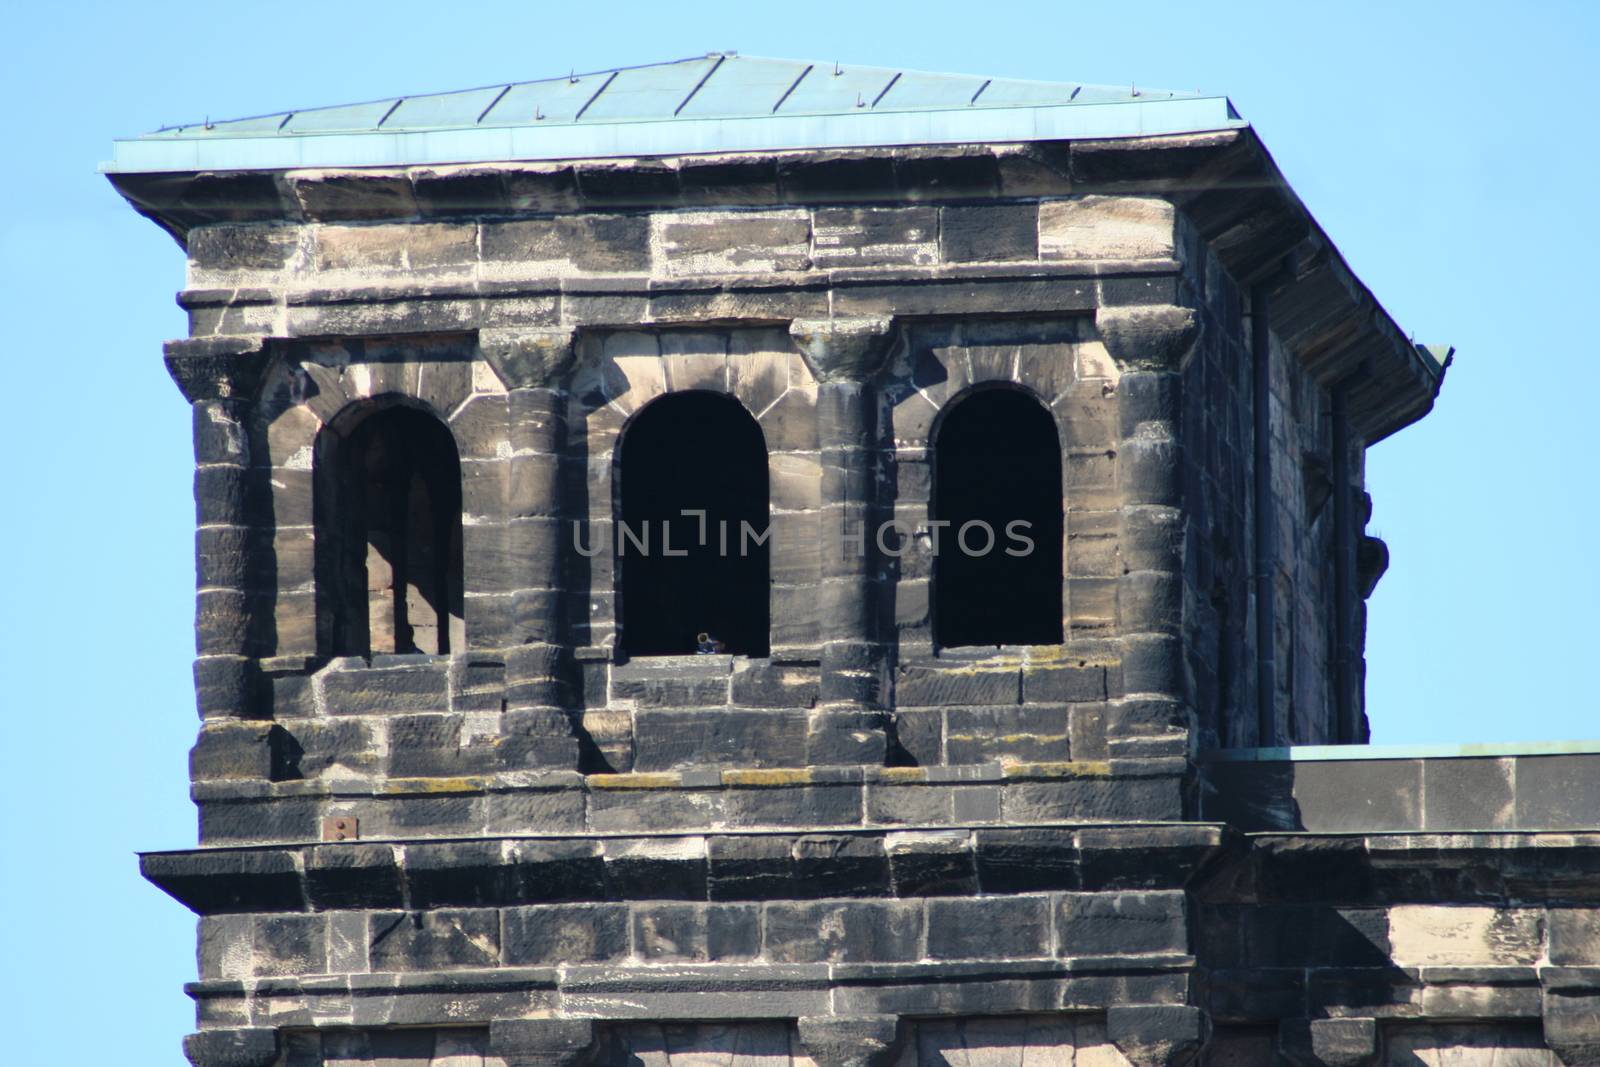 Partial view of Porta Nigra in Trier, Germany's oldest city    Teilansicht Porta Nigra in Trier,�lteste Stadt Deutschland�s by hadot